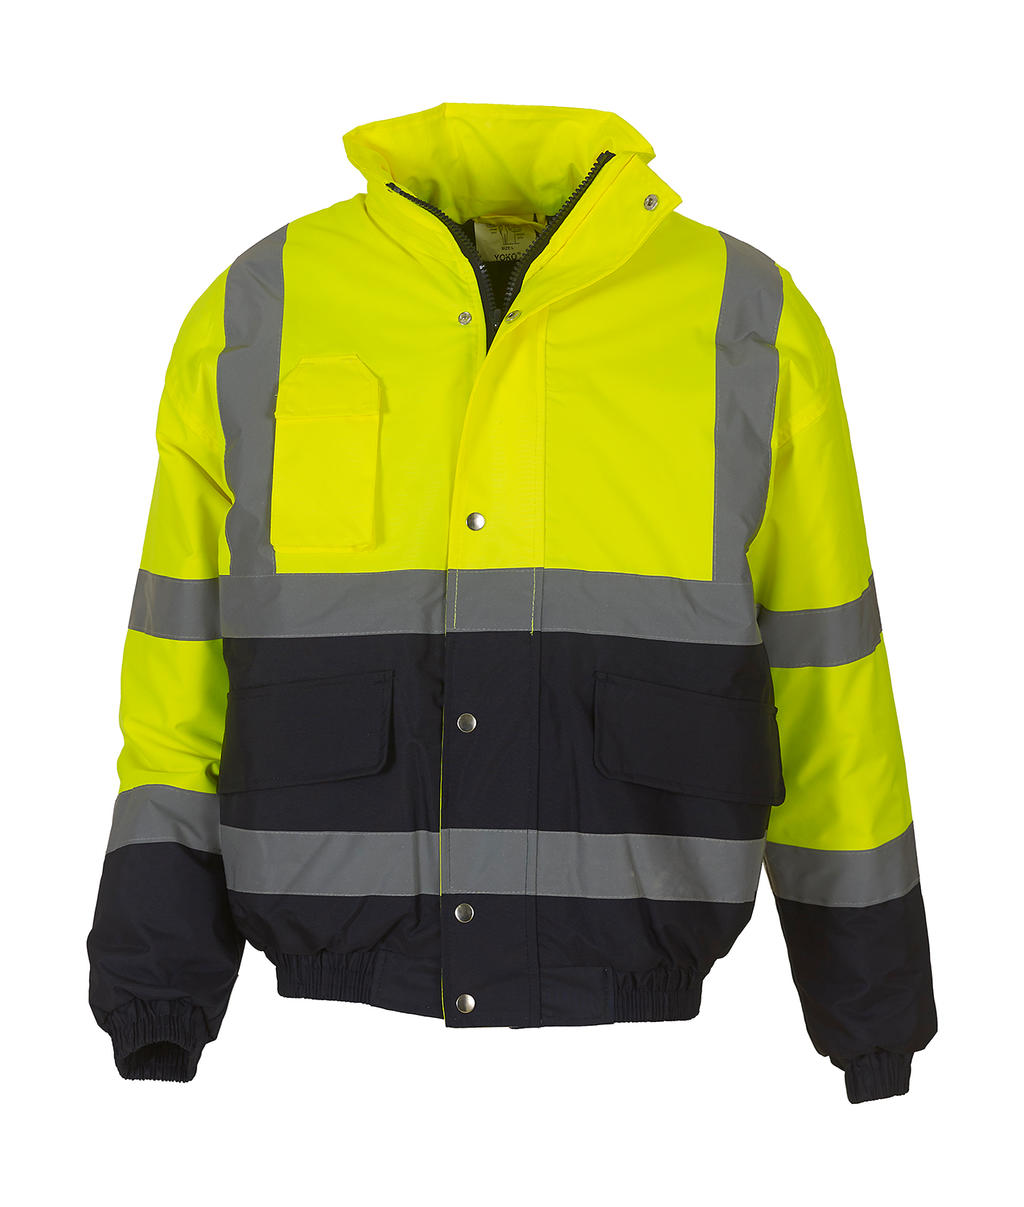  Fluo 2-Tone Bomber Jacket in Farbe Fluo Yellow/Navy